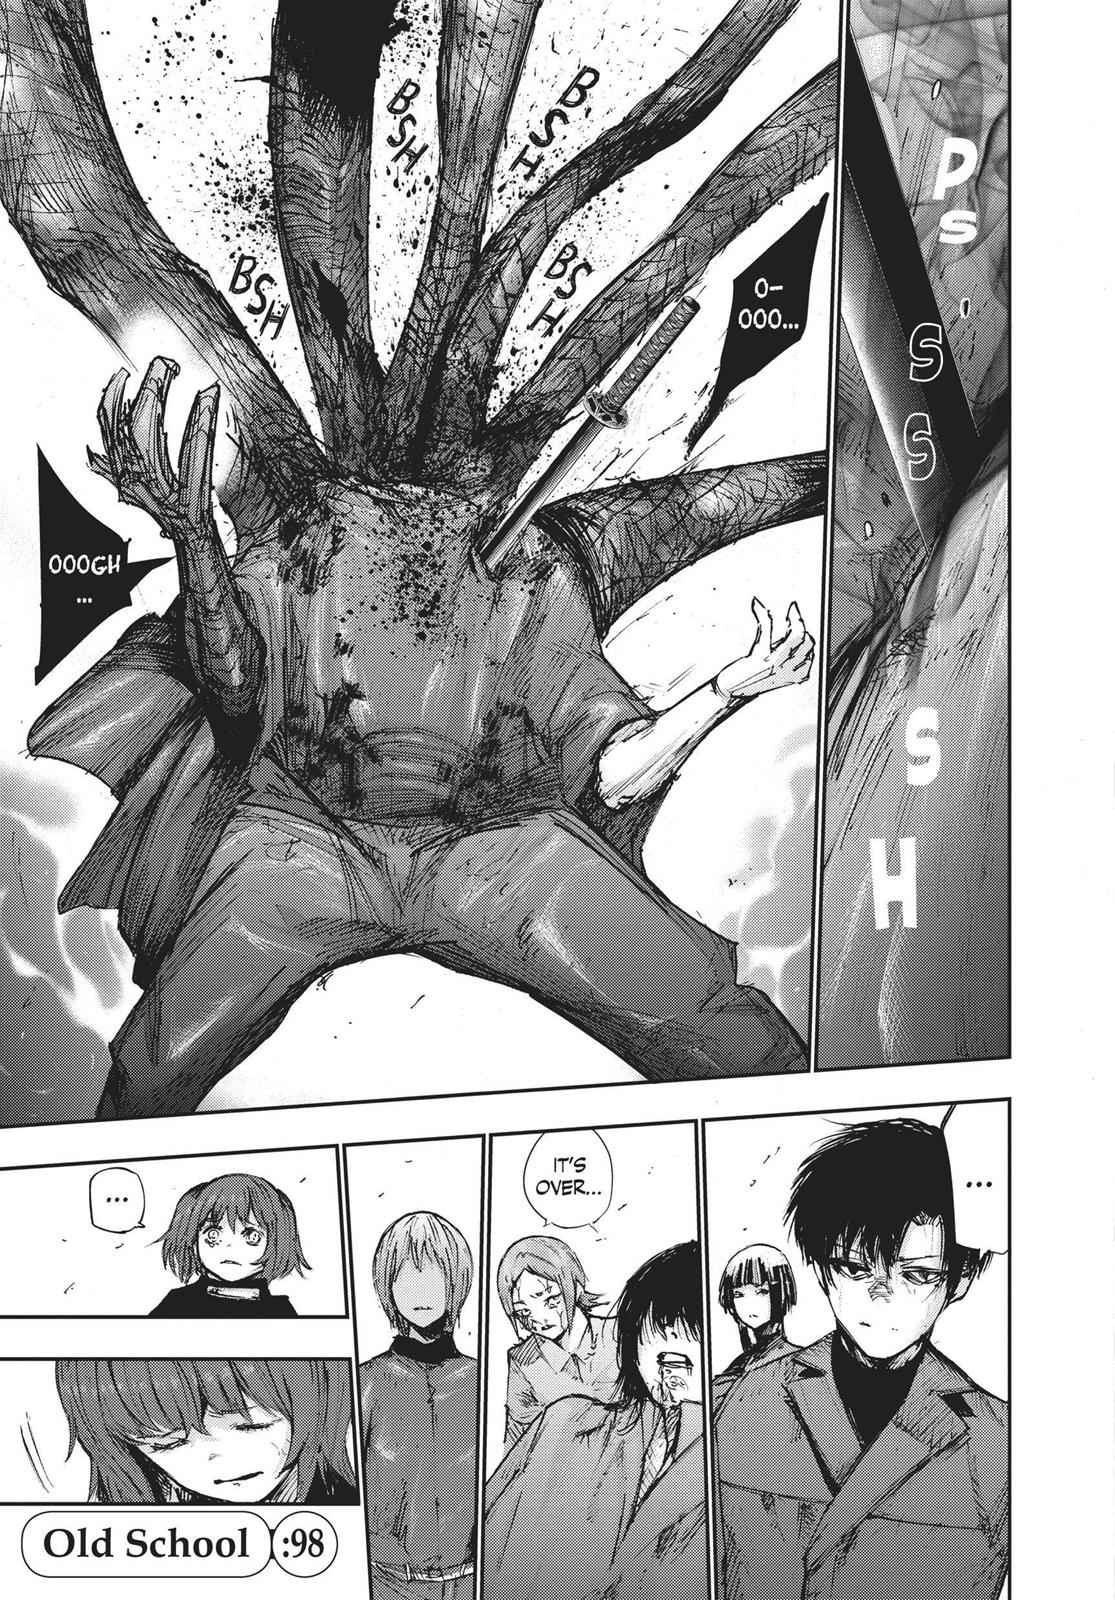 Chainsaw Man Part 2 chapter 98 now available: how to read it free